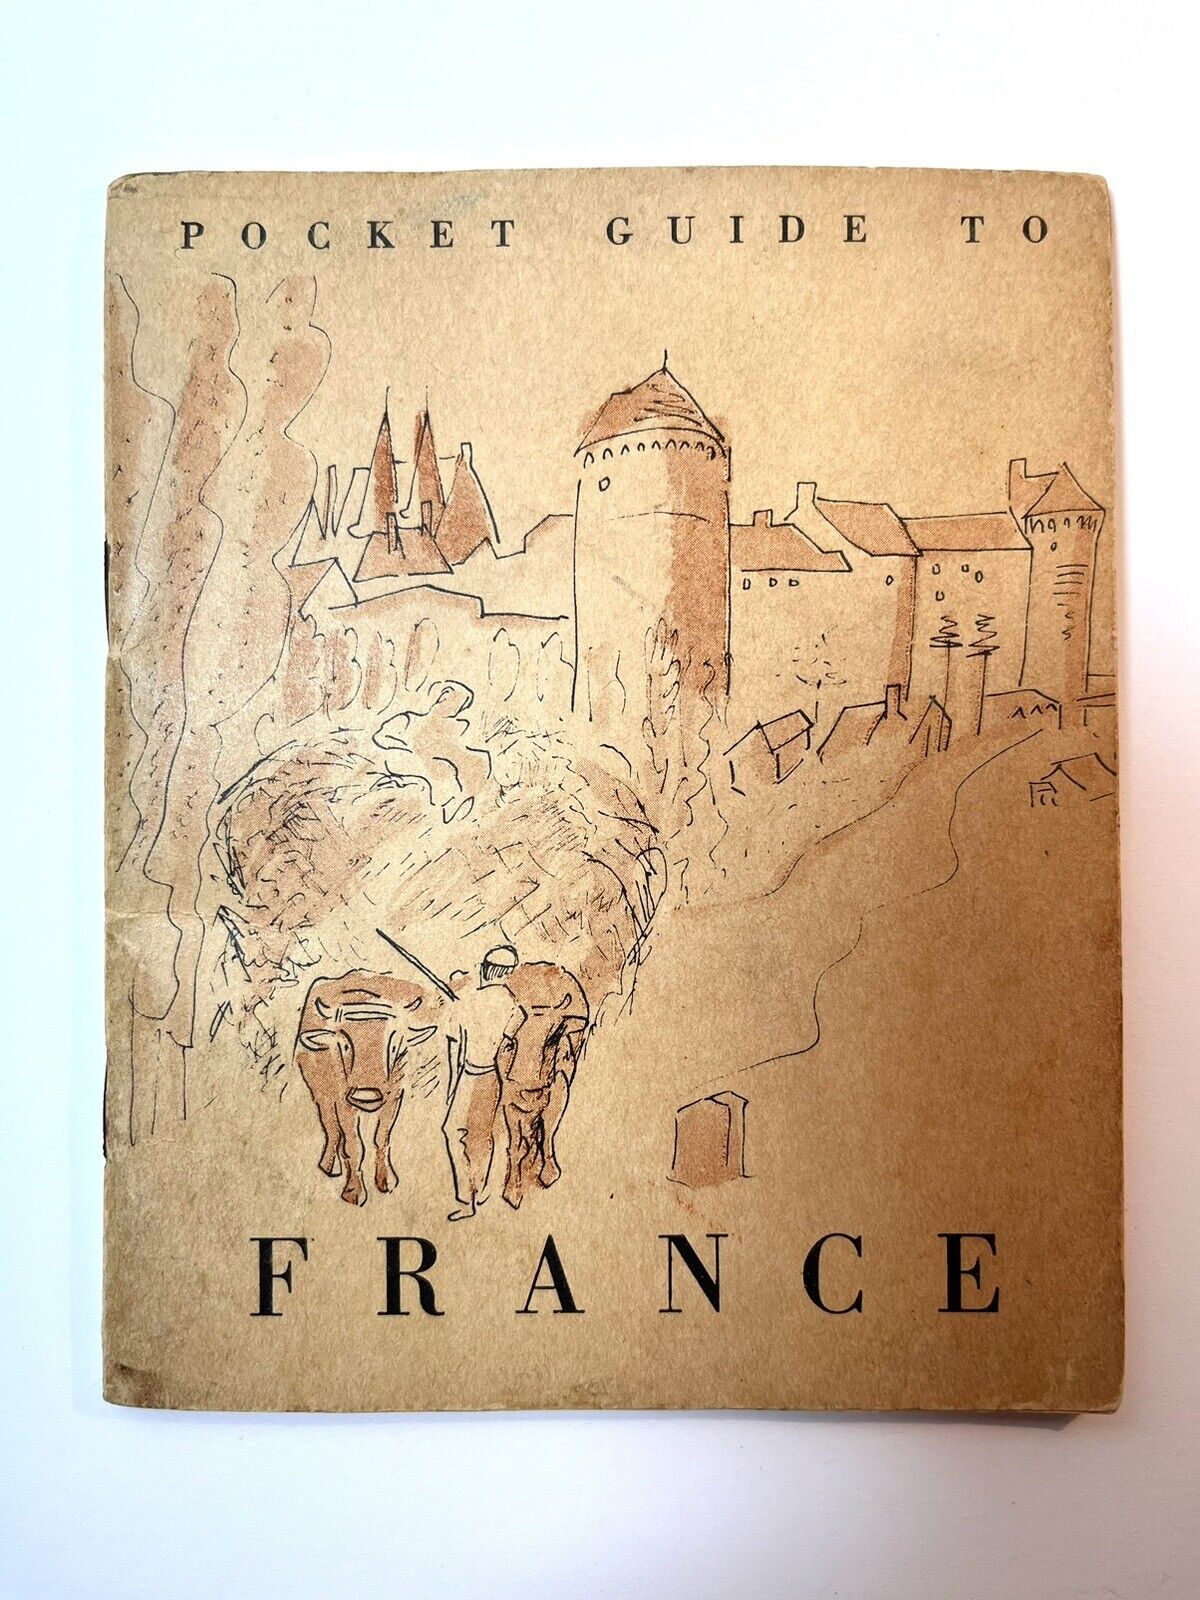 1944 Pocket Guide to France - For World War II US Soldiers Occupied France